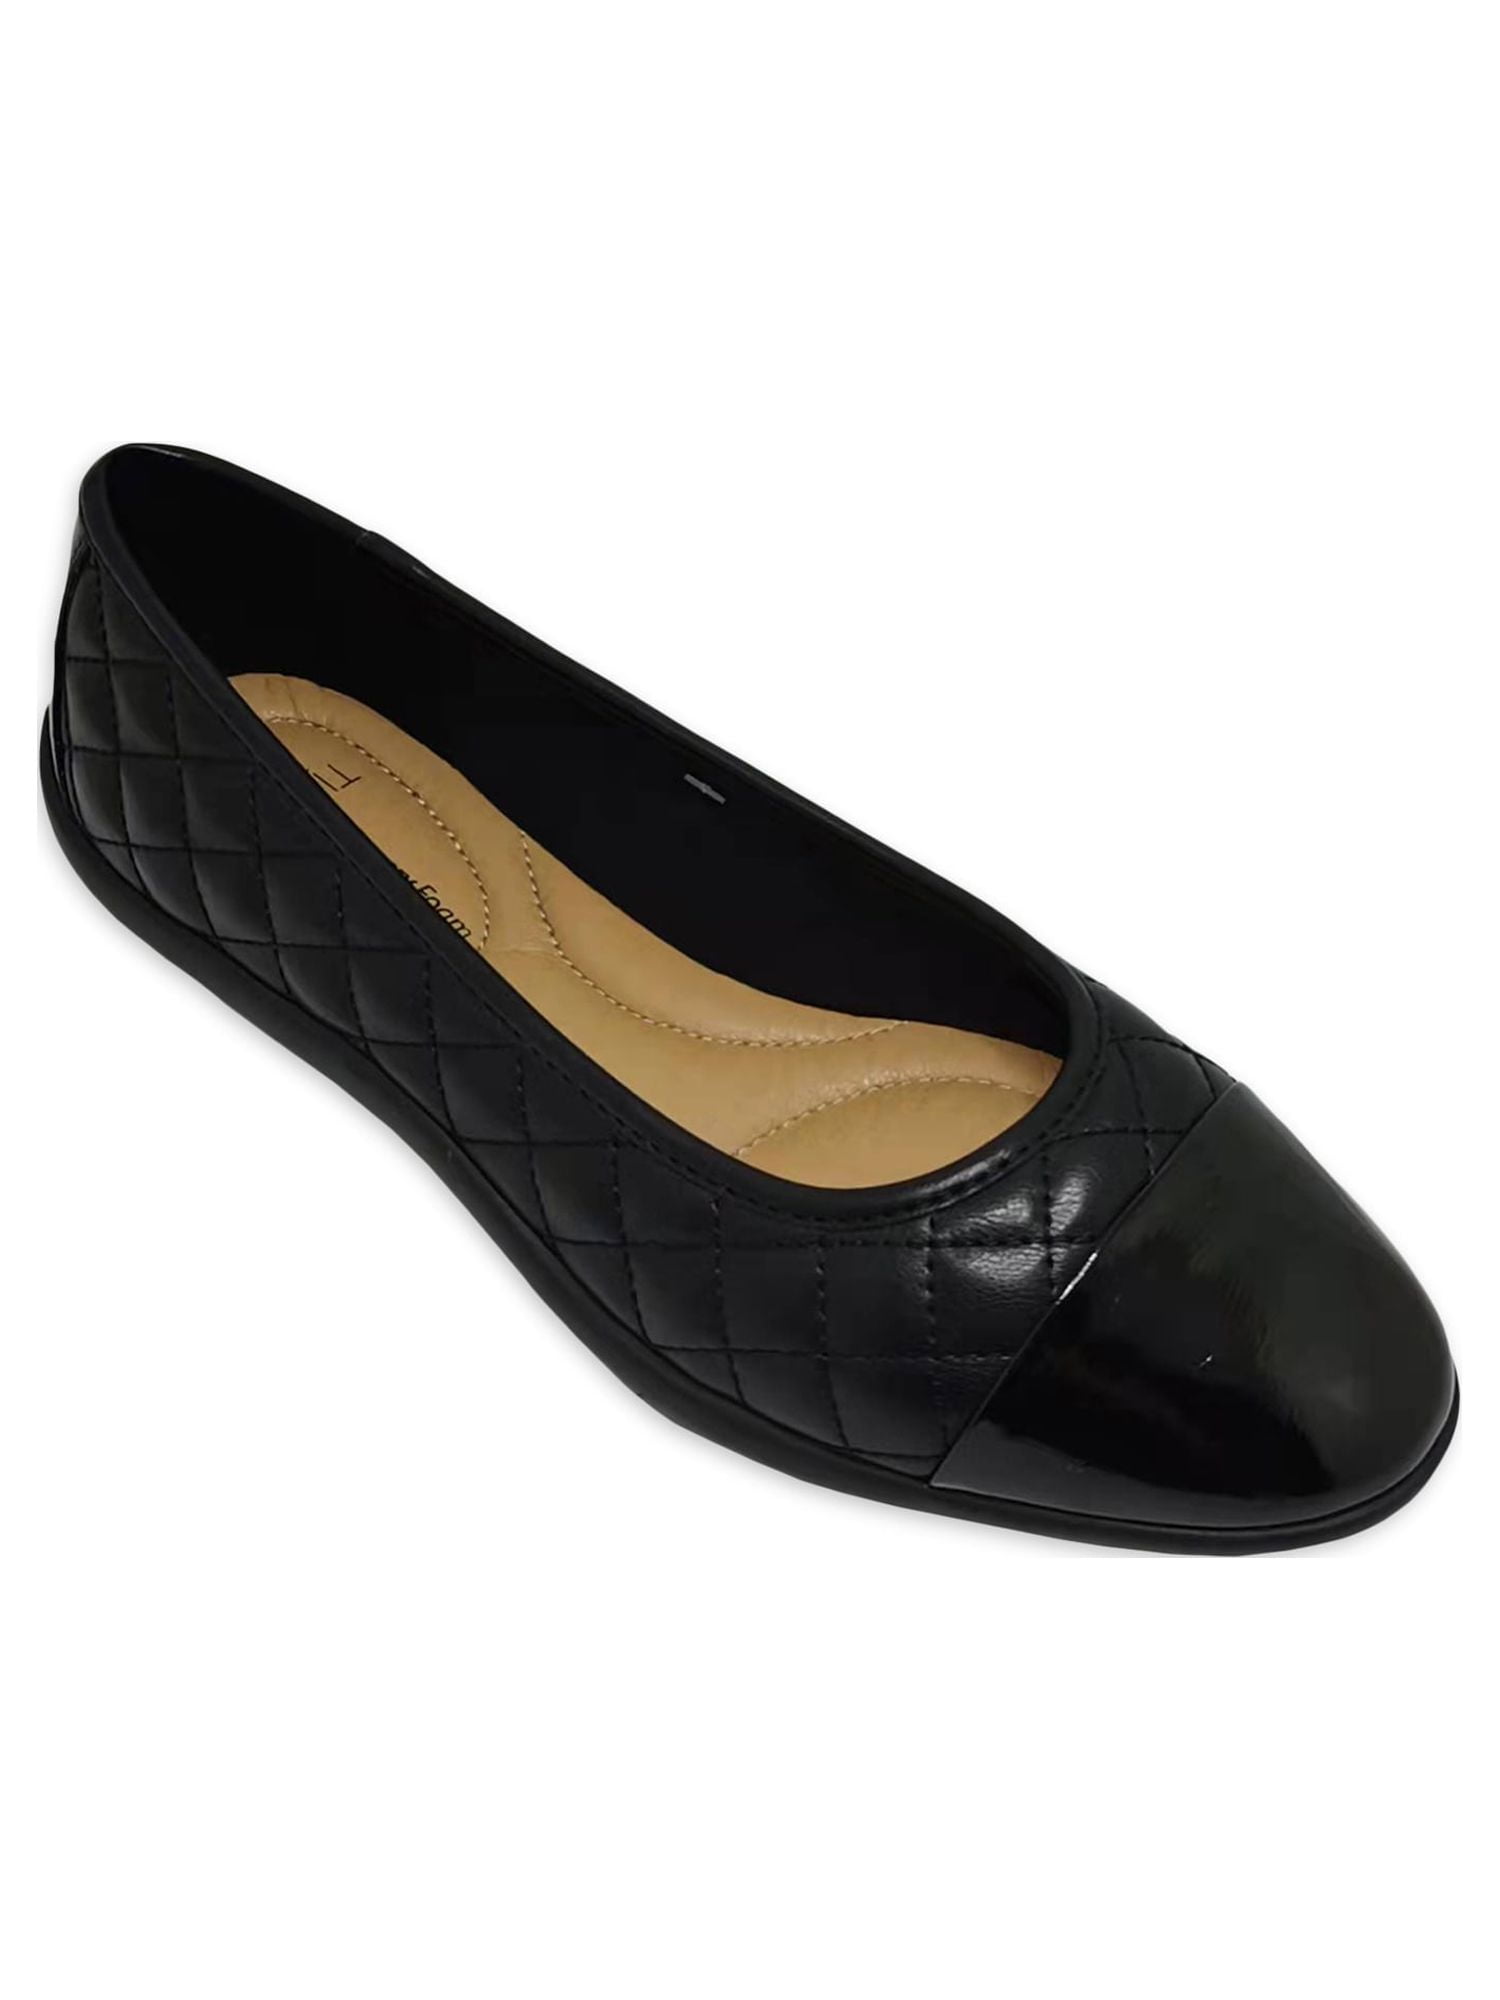 Paul Mayer Attitudes Quilted Cap Toe Ballet Flats in Tan and Black Patent Leather 7b